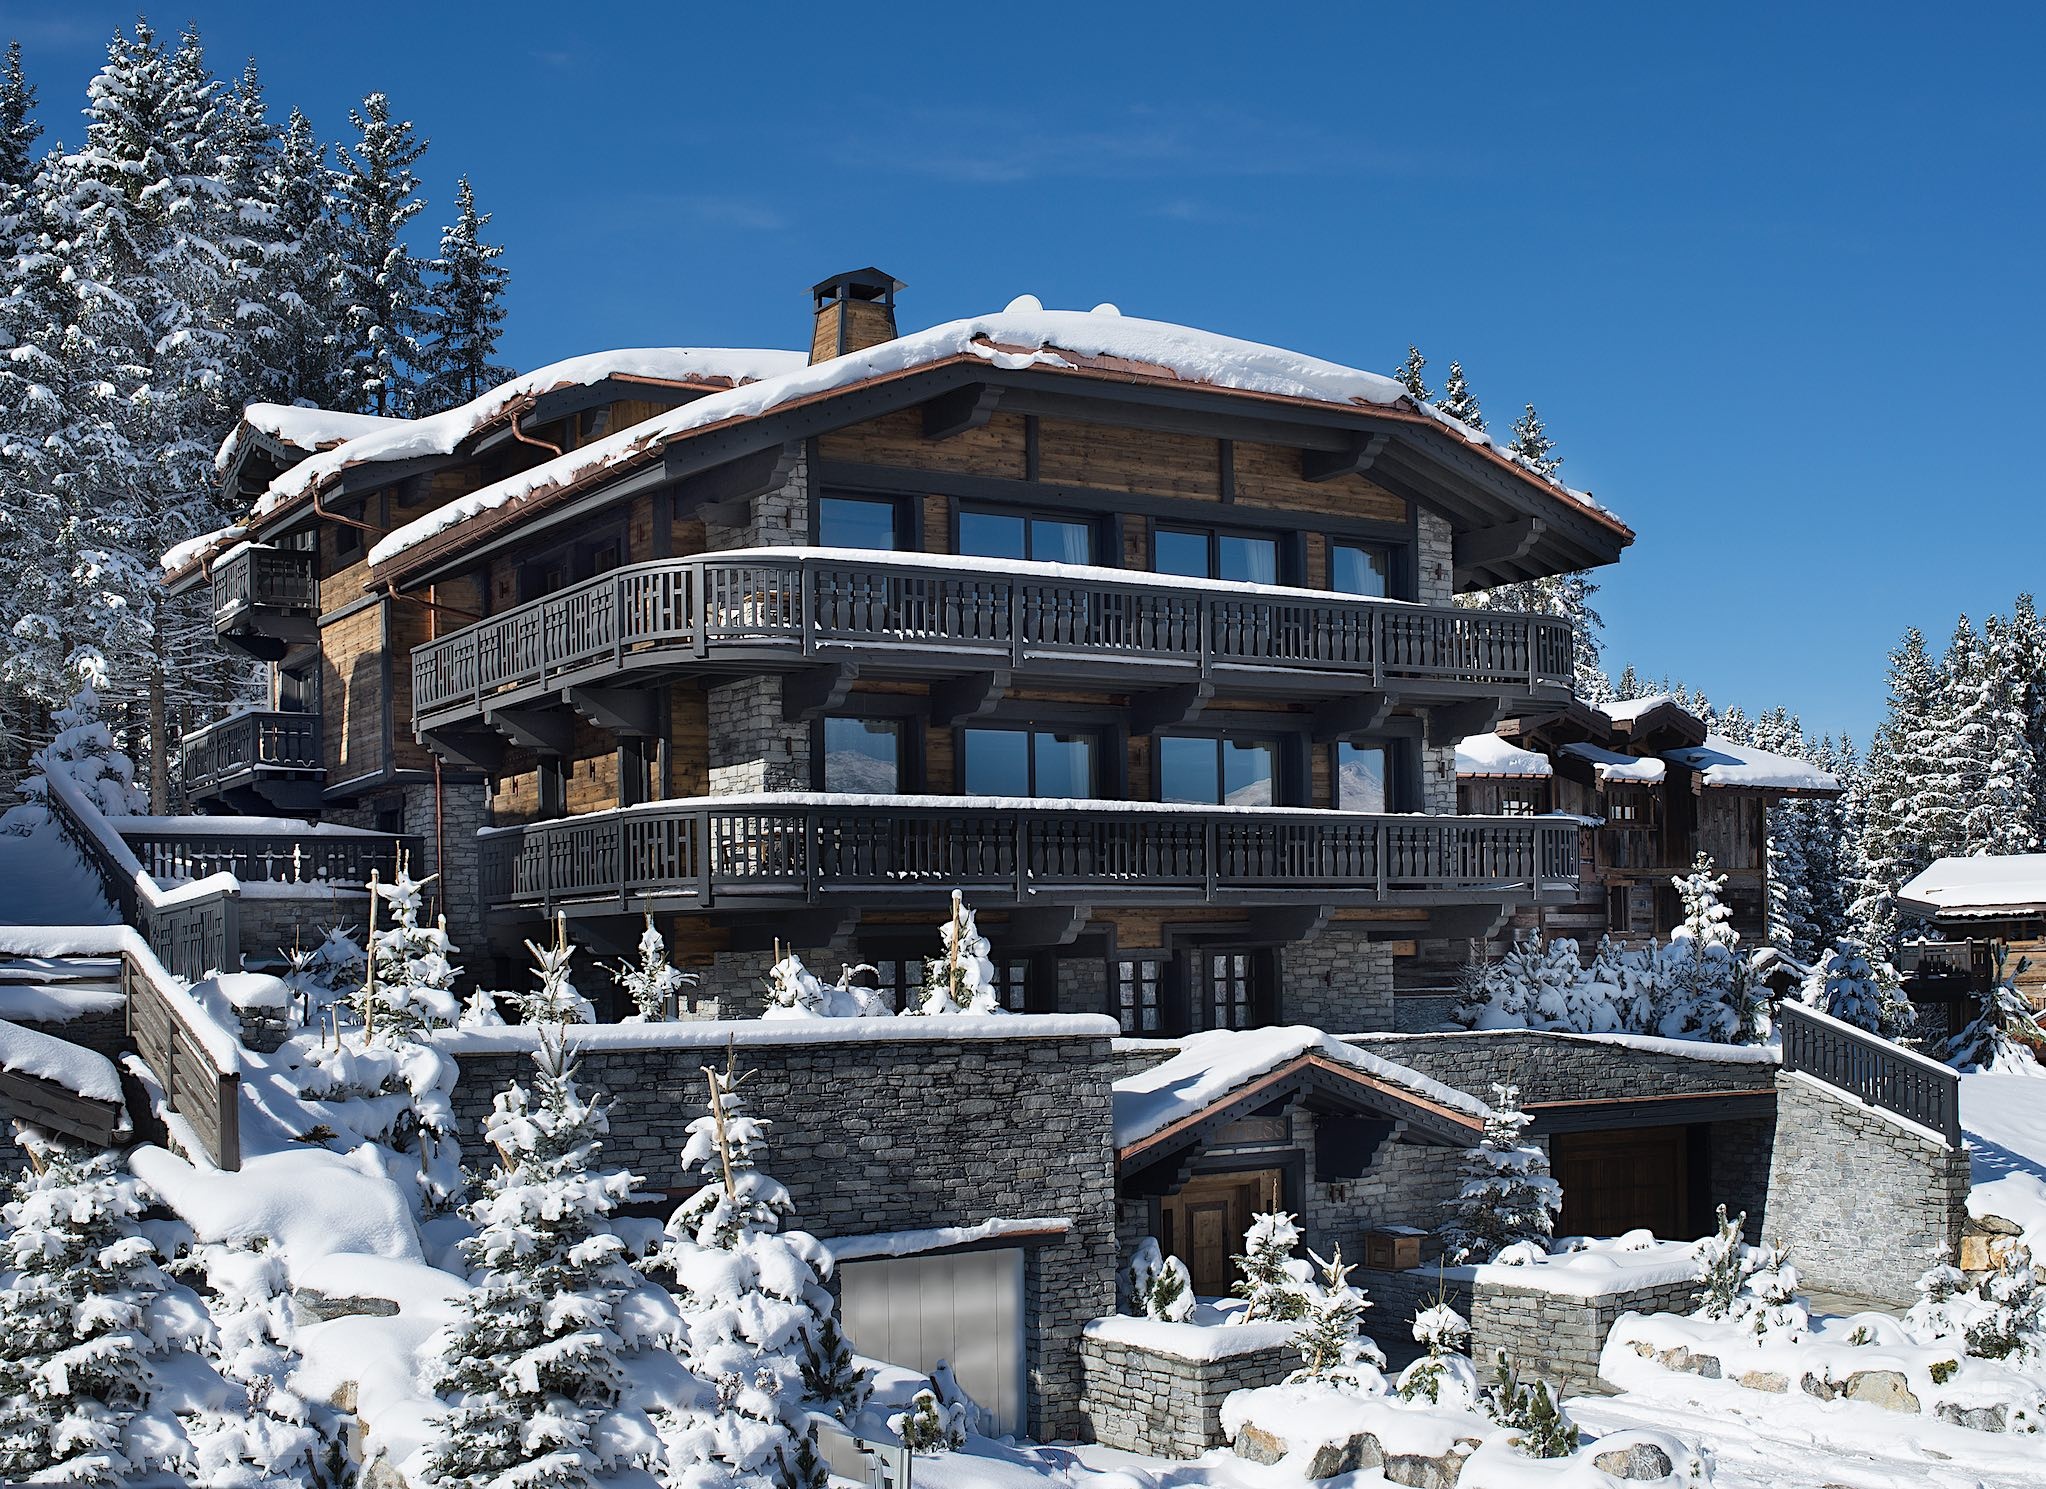 Things to do in Courchevel, Must-visit villas and chalets, Exciting activities, Memorable experiences, 2050x1490 HD Desktop